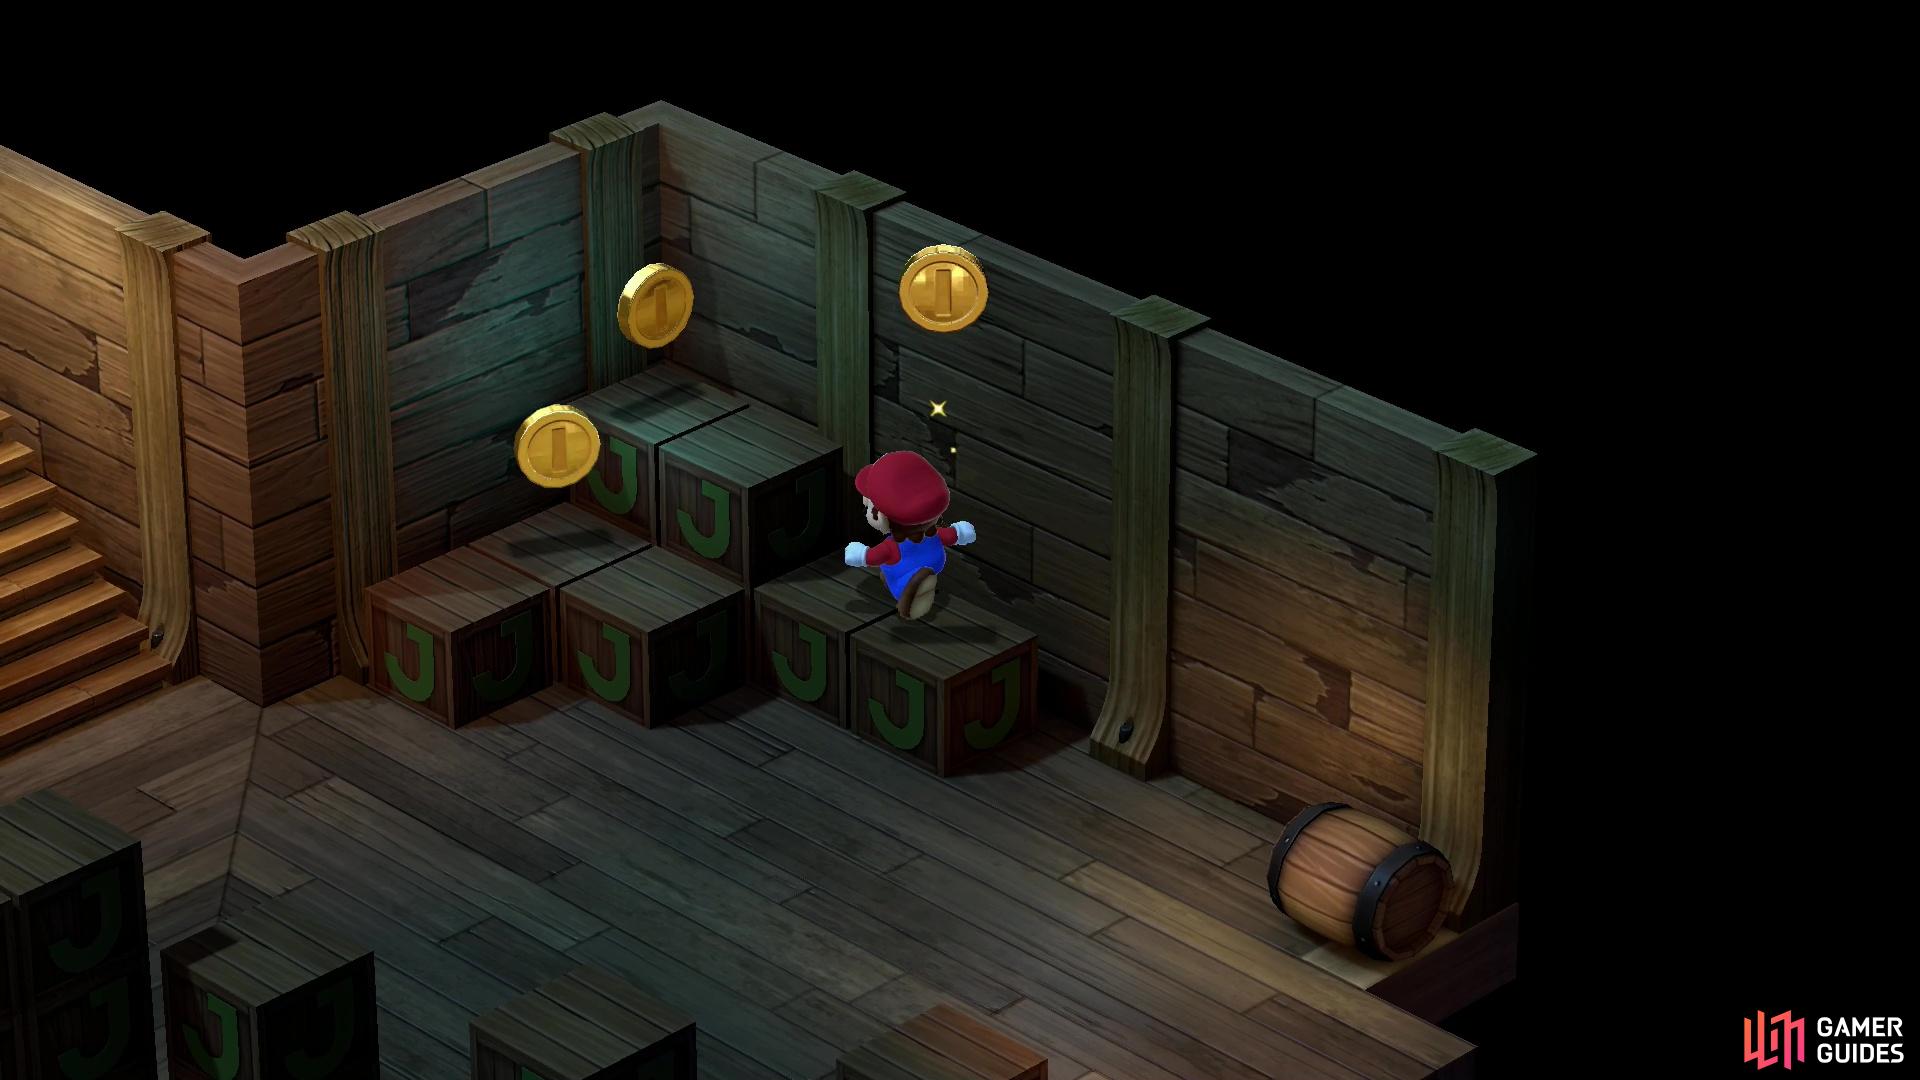 You'll need to chase a master coin around the room, picking up the checkpoint coins it spawns as it goes.